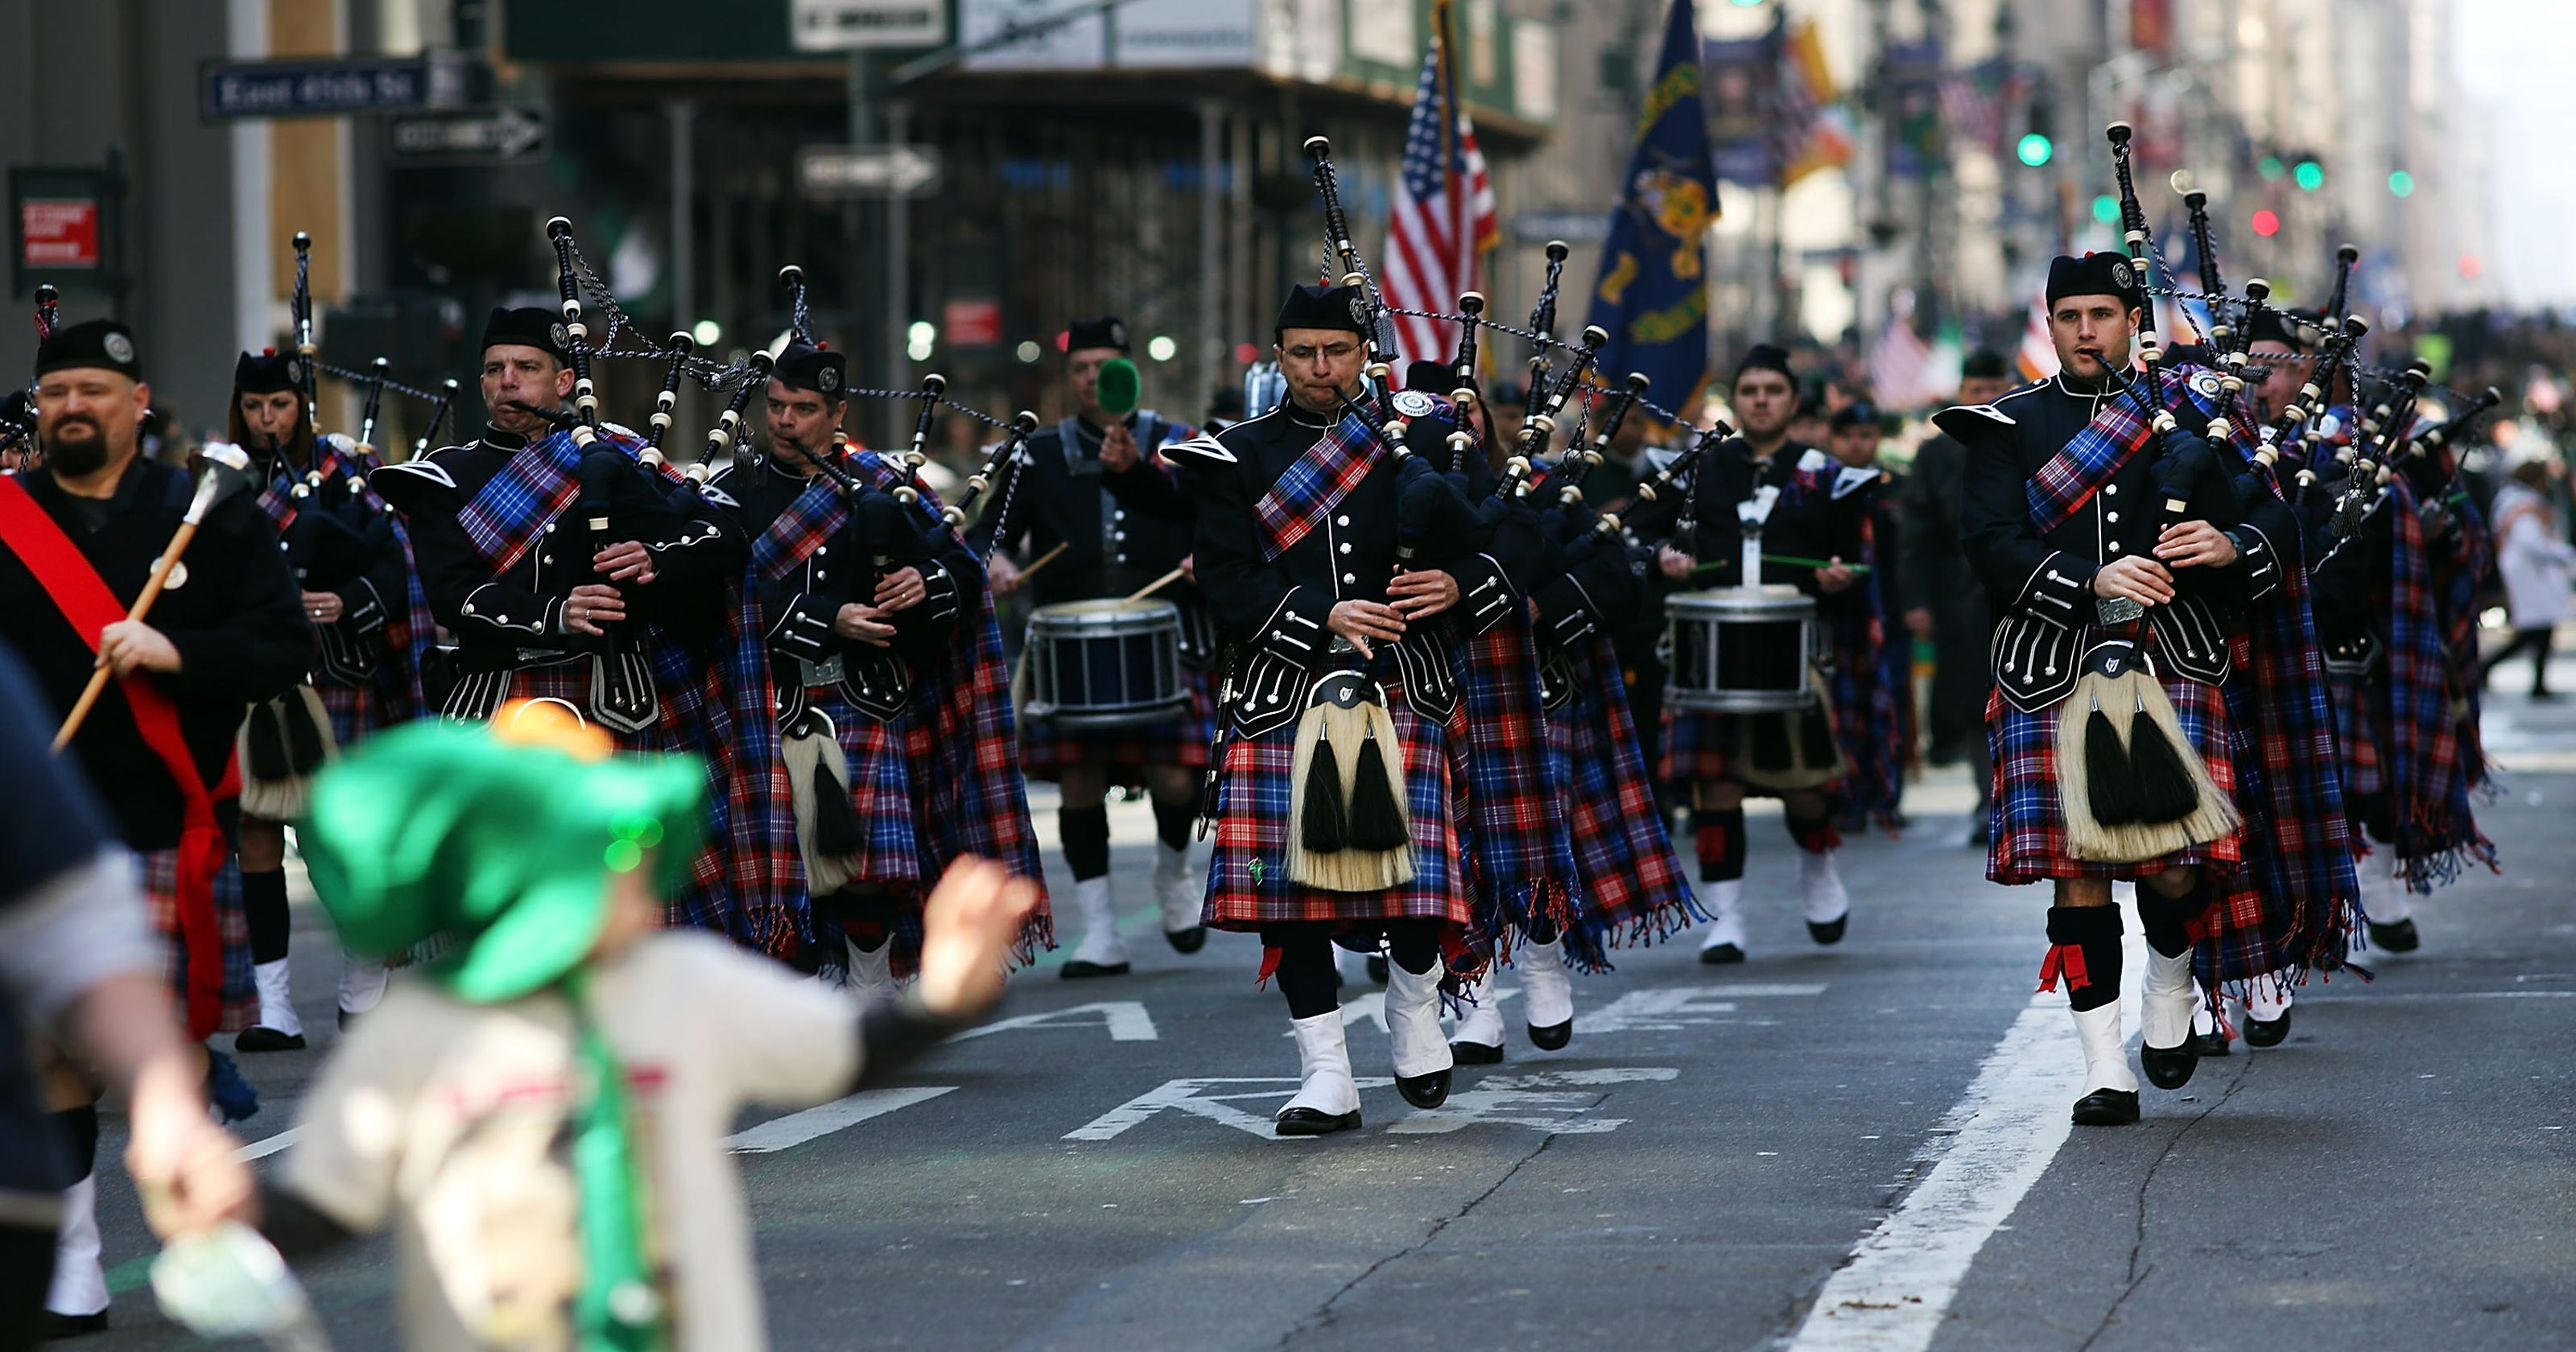 Watch live St. Patrick's Day parade marches through NYC